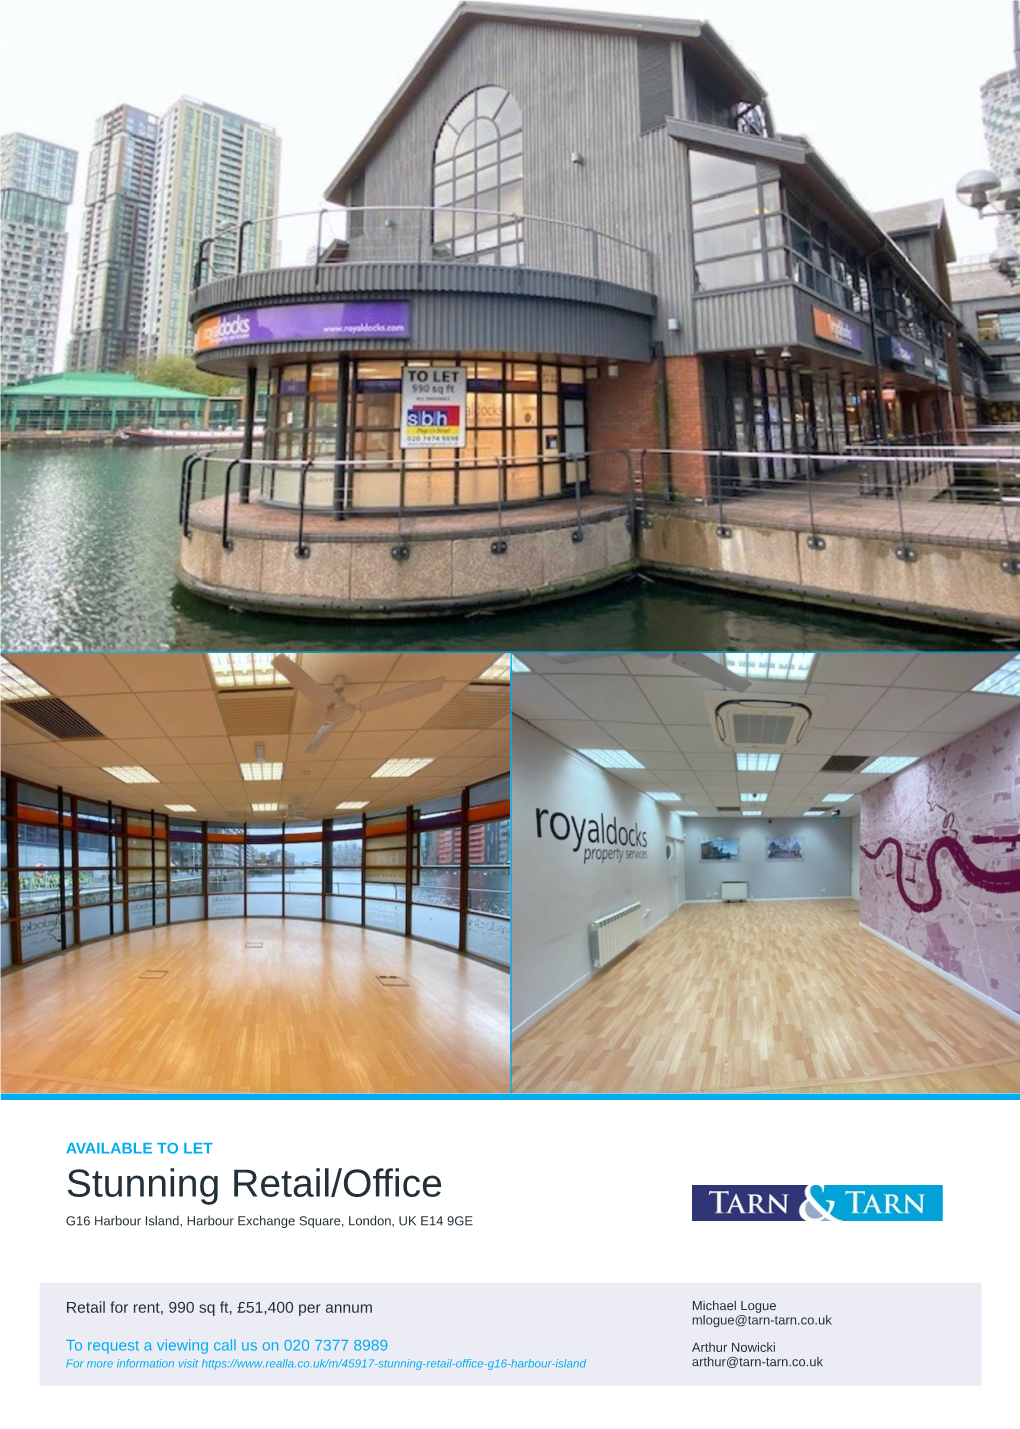 Stunning Retail/Office G16 Harbour Island, Harbour Exchange Square, London, UK E14 9GE